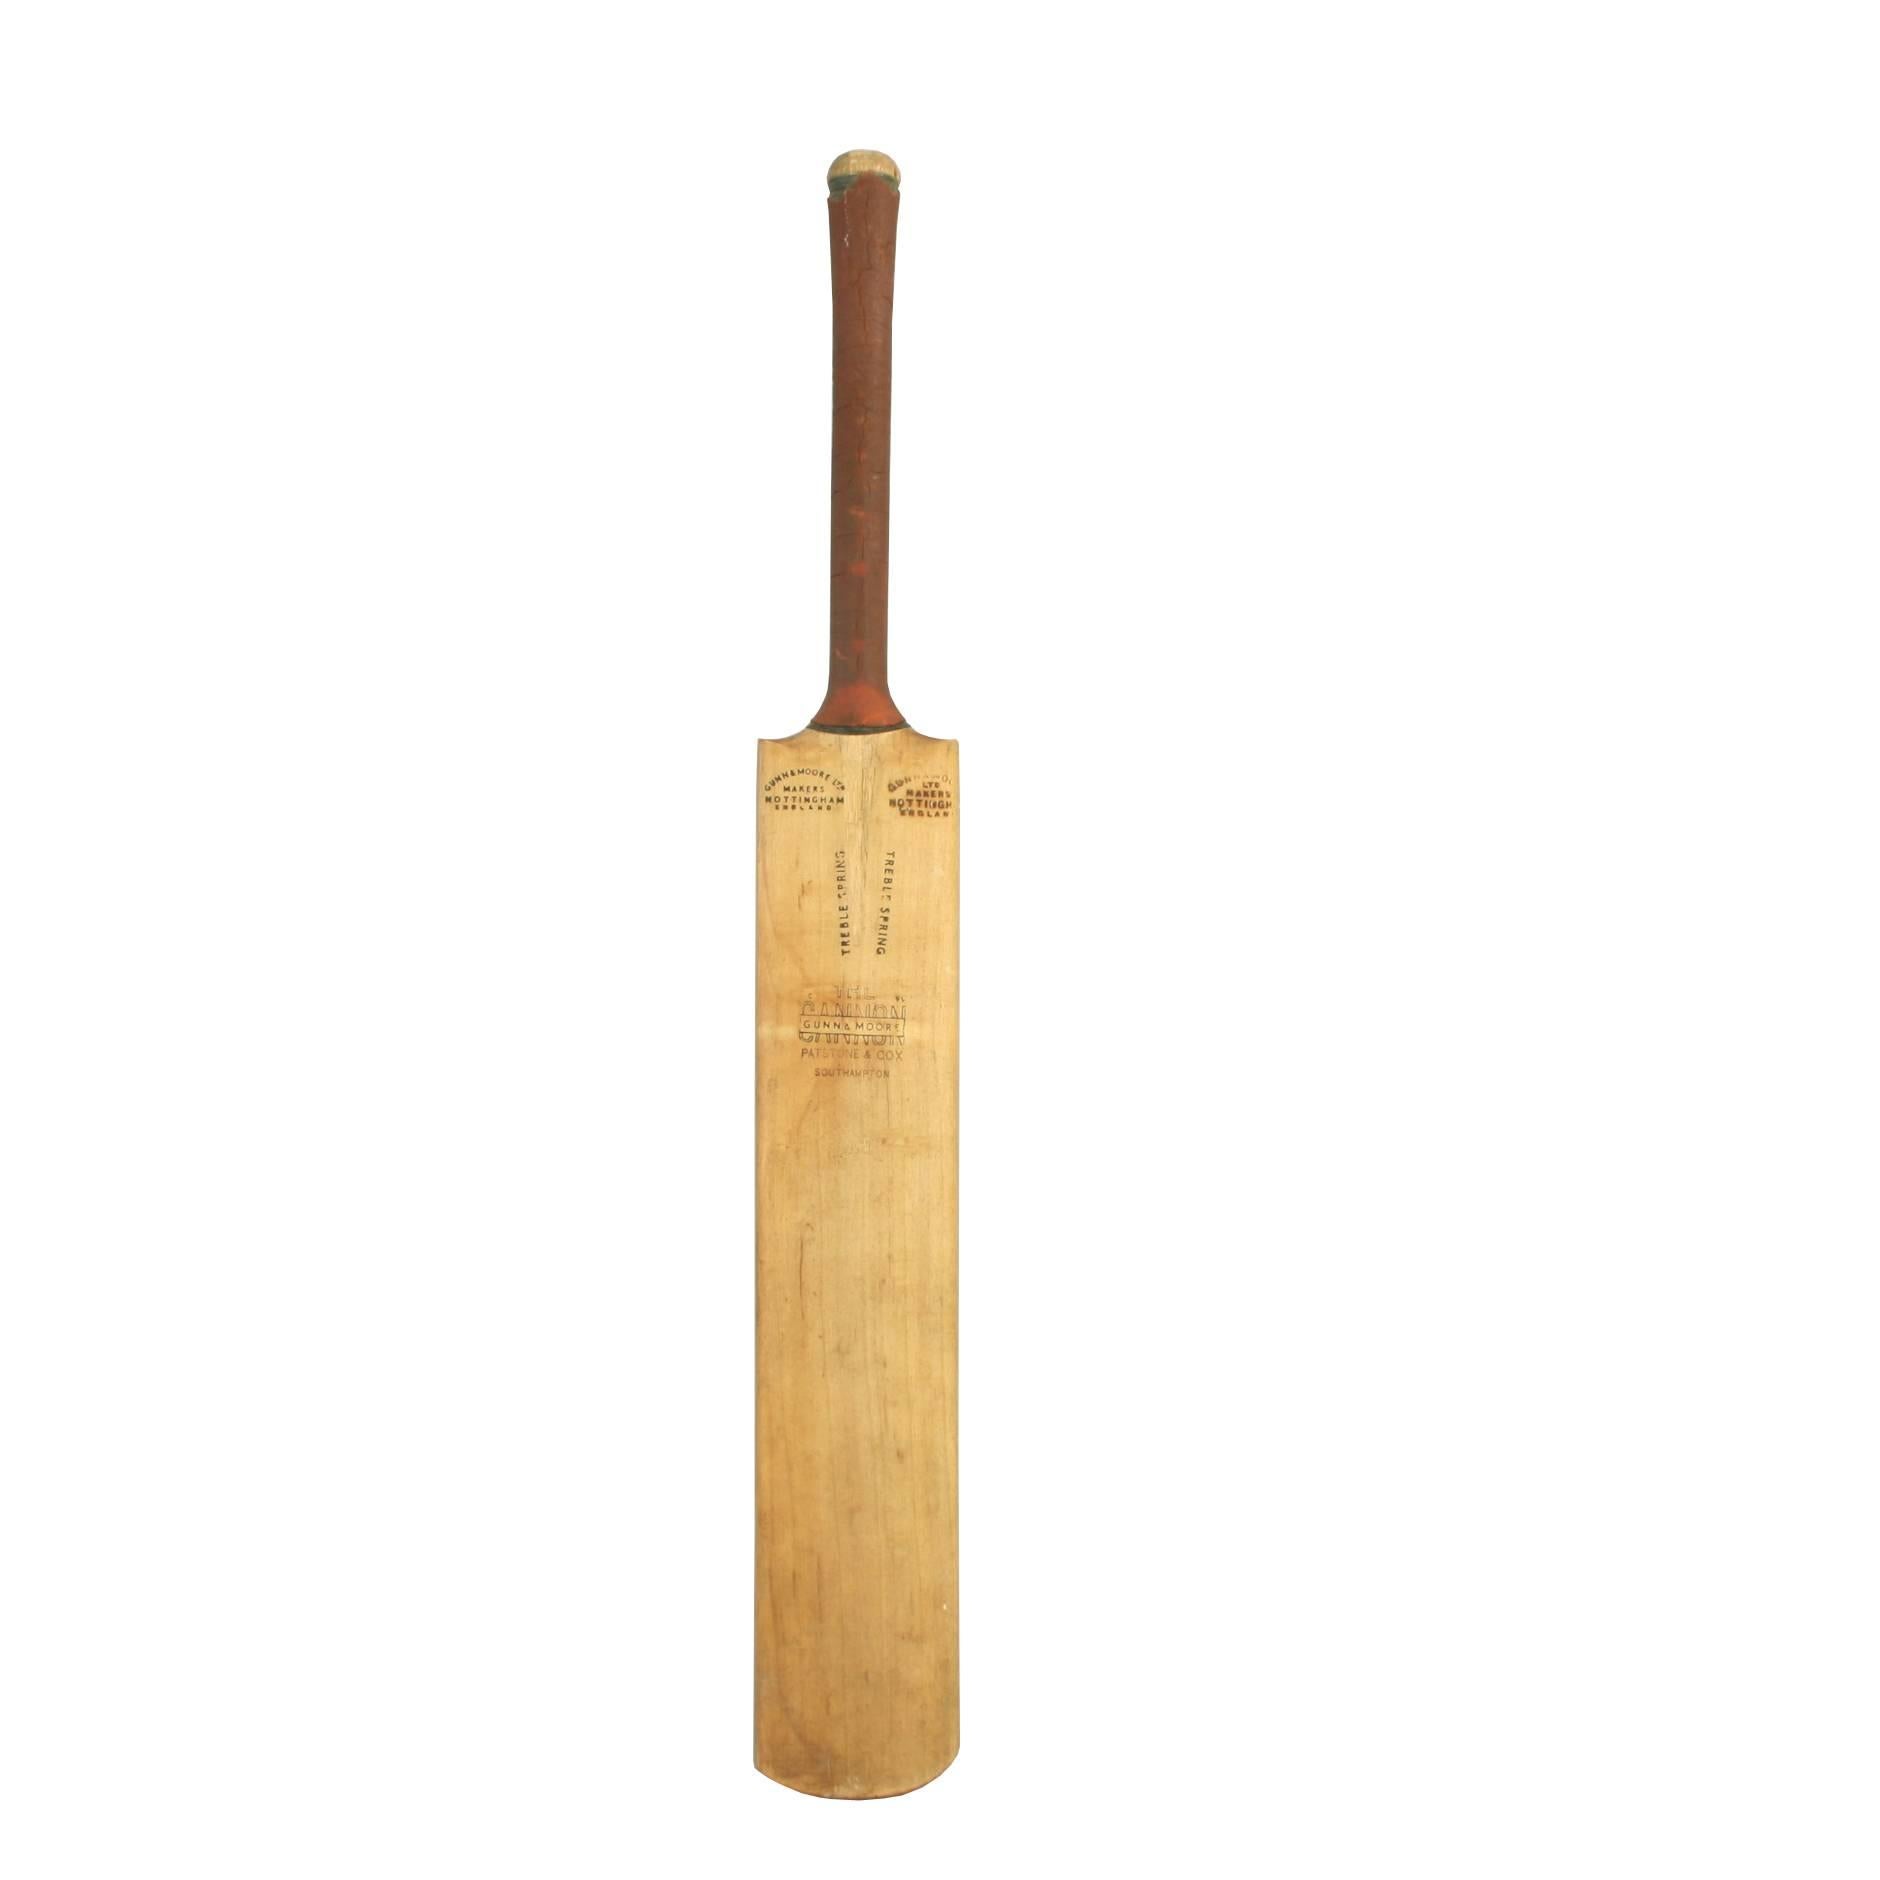 A good Gunn & Moore cricket bat 'The Cannon'. The writing on the two shoulders reads: 'Gun & Moore ltd, makers, Nottingham England', whilst on the blade treble spring, the 'Cannon', gun & Moore, 'Patstone & COX, Southampton'. A good